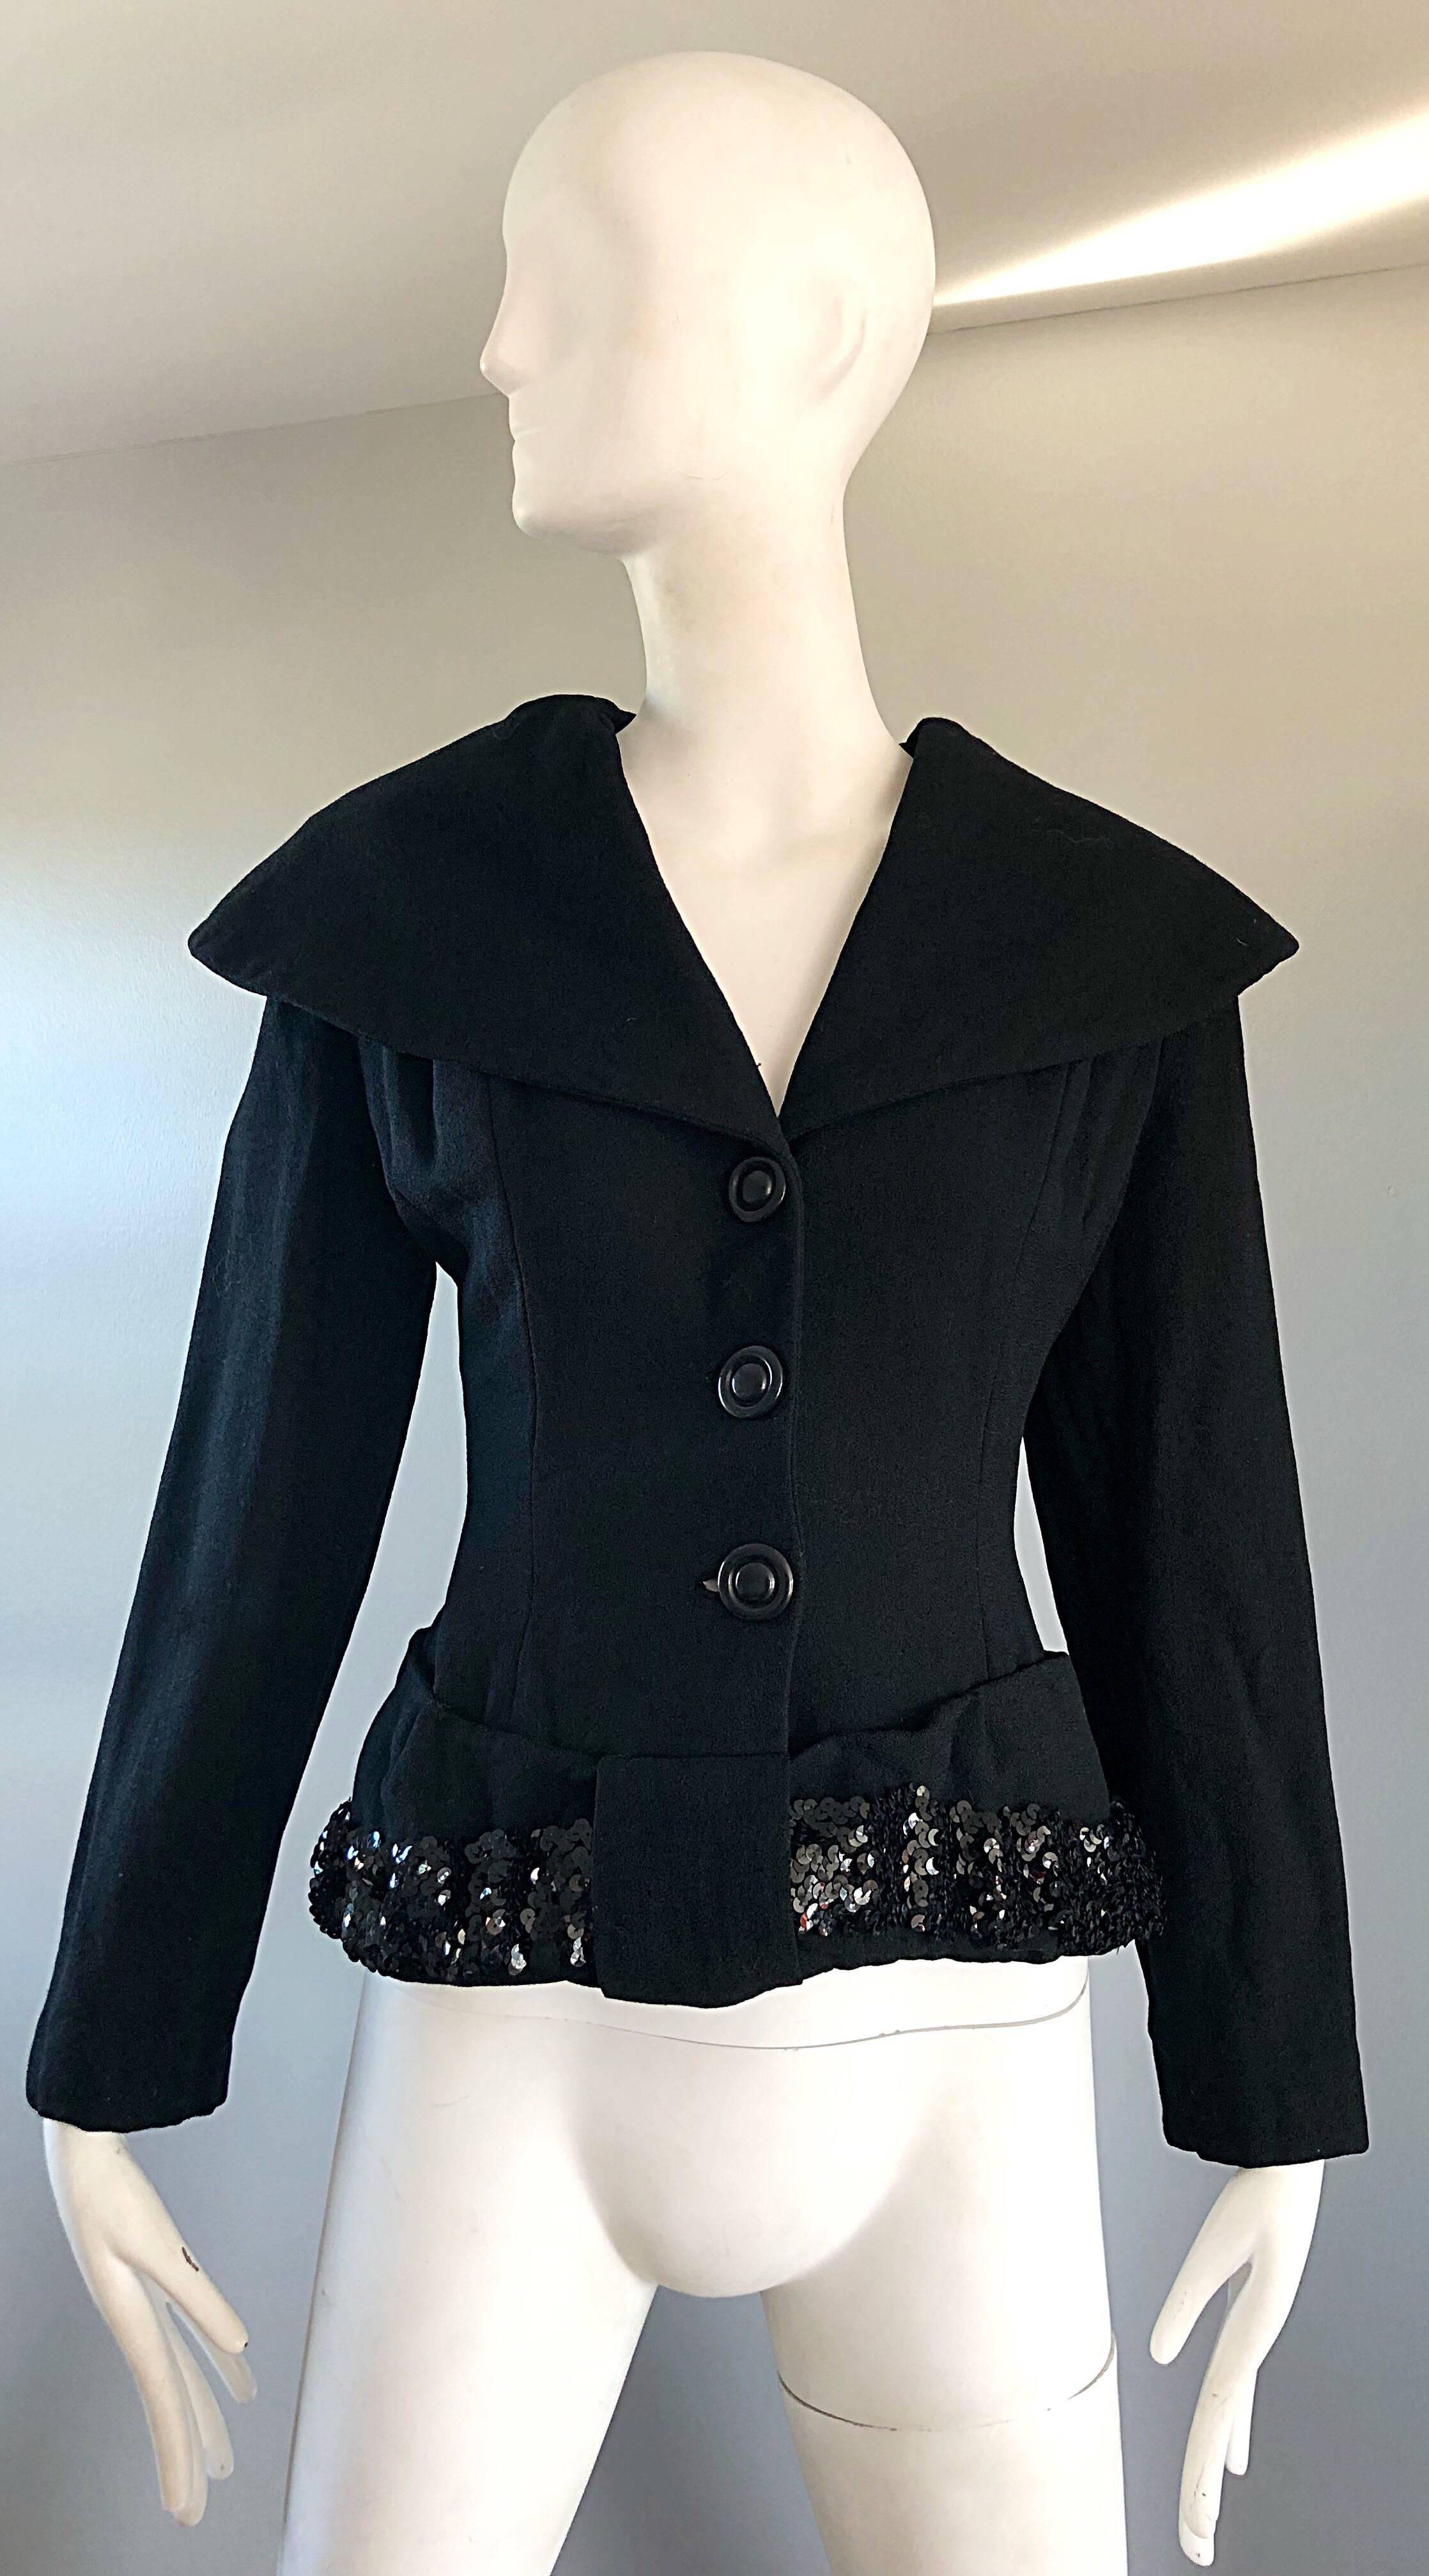 Gorgeous 1940s LILLI ANN black wool and sequined jacket! Features a dramatic portrait collar, with a smart chic tailored fit. Hundreds of hand-sewn black sequins at the trim. Buttons up the front bodice, with hidden snap details at the hem to ensure